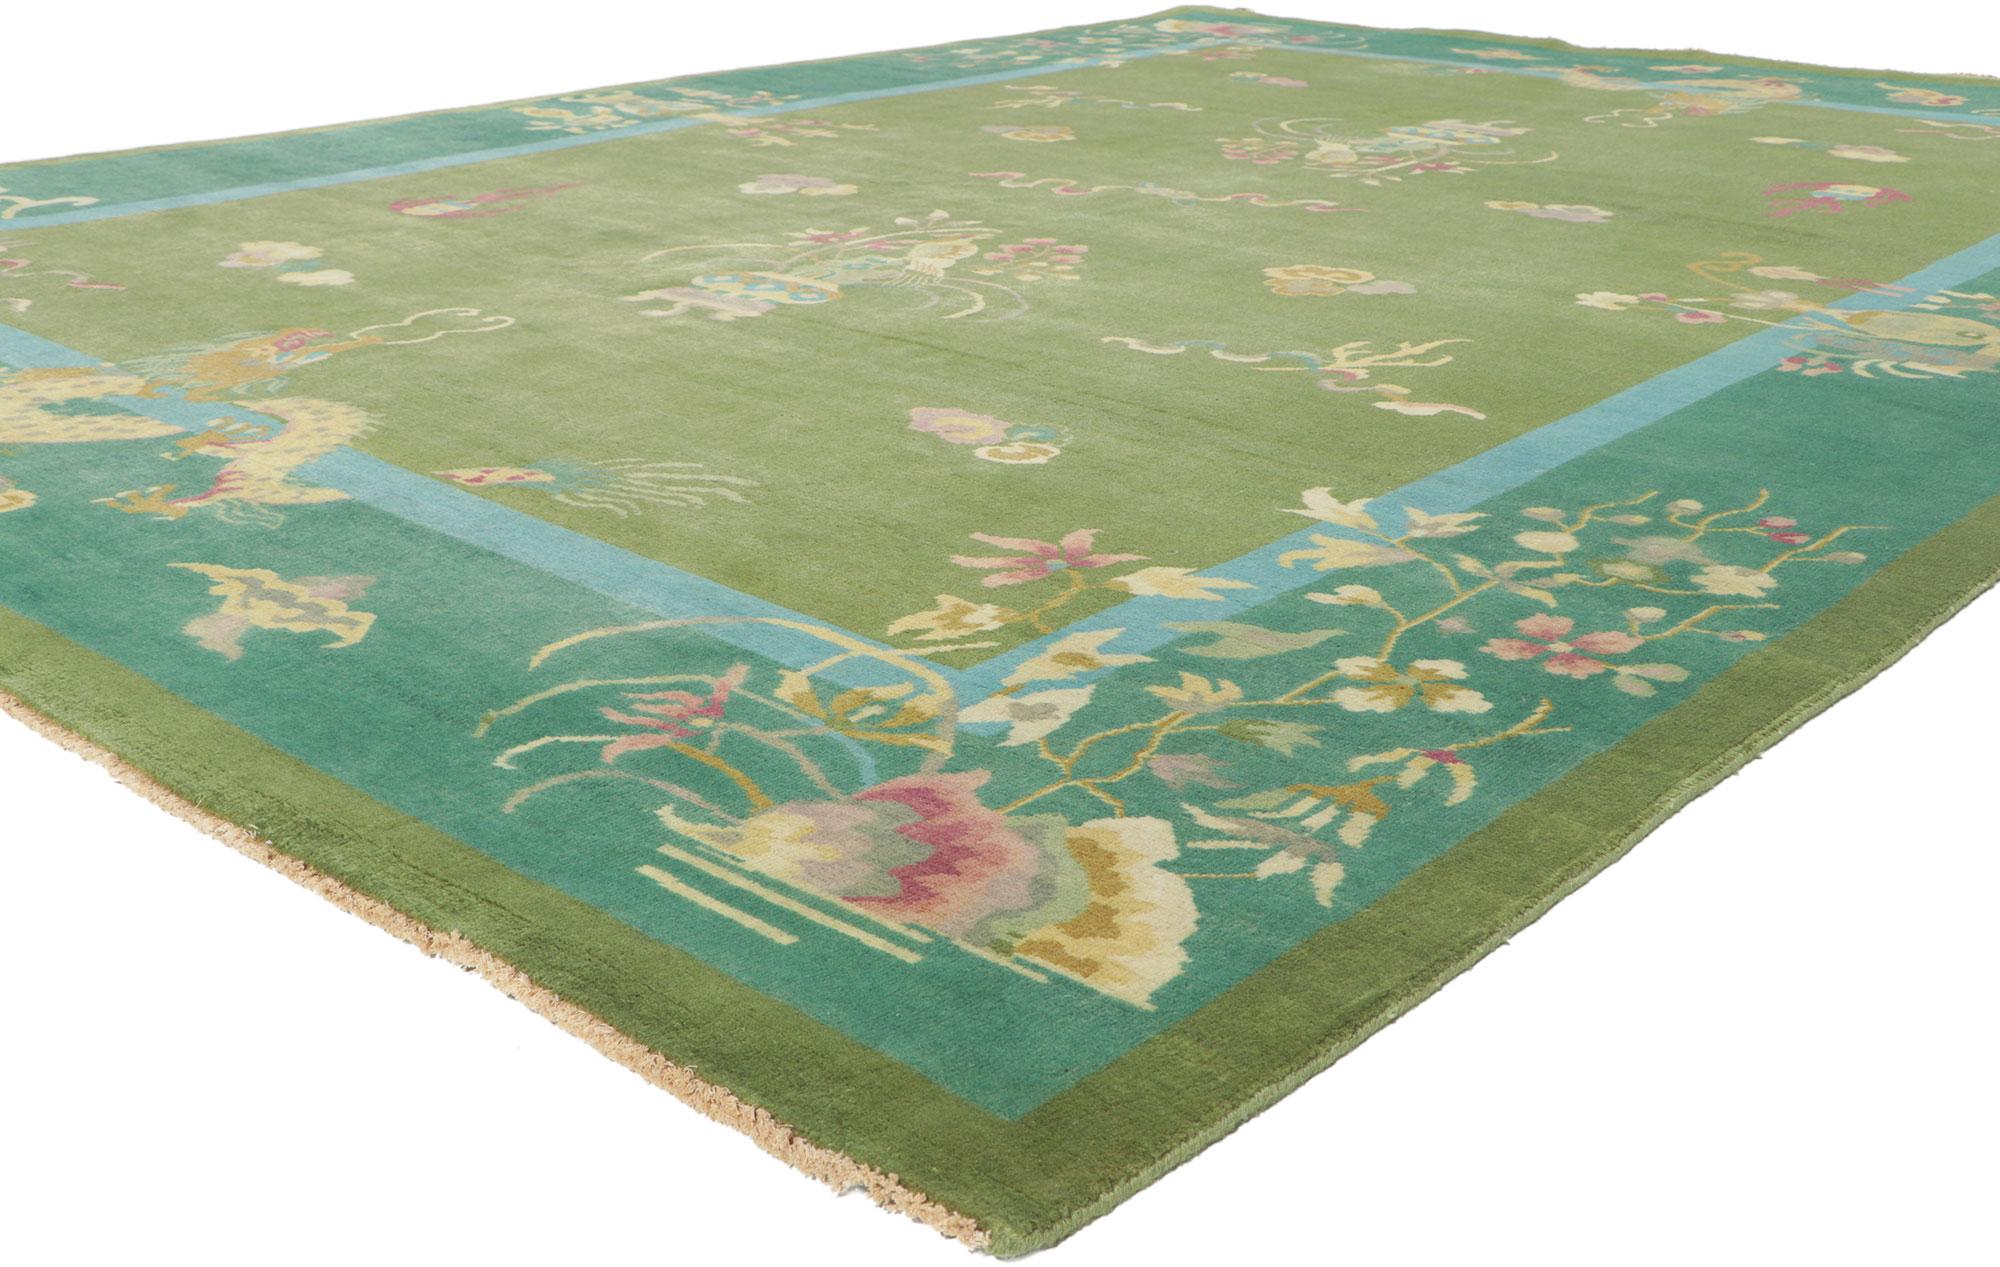 30923 New Chinese Art Deco Rug with Maximalist Style, 09'00 x 12'02.
Emanating maximalism with incredible detail and lavish texture, this Chinese Art Deco style rug is a captivating vision of woven beauty. The mythological imagery and vibrant